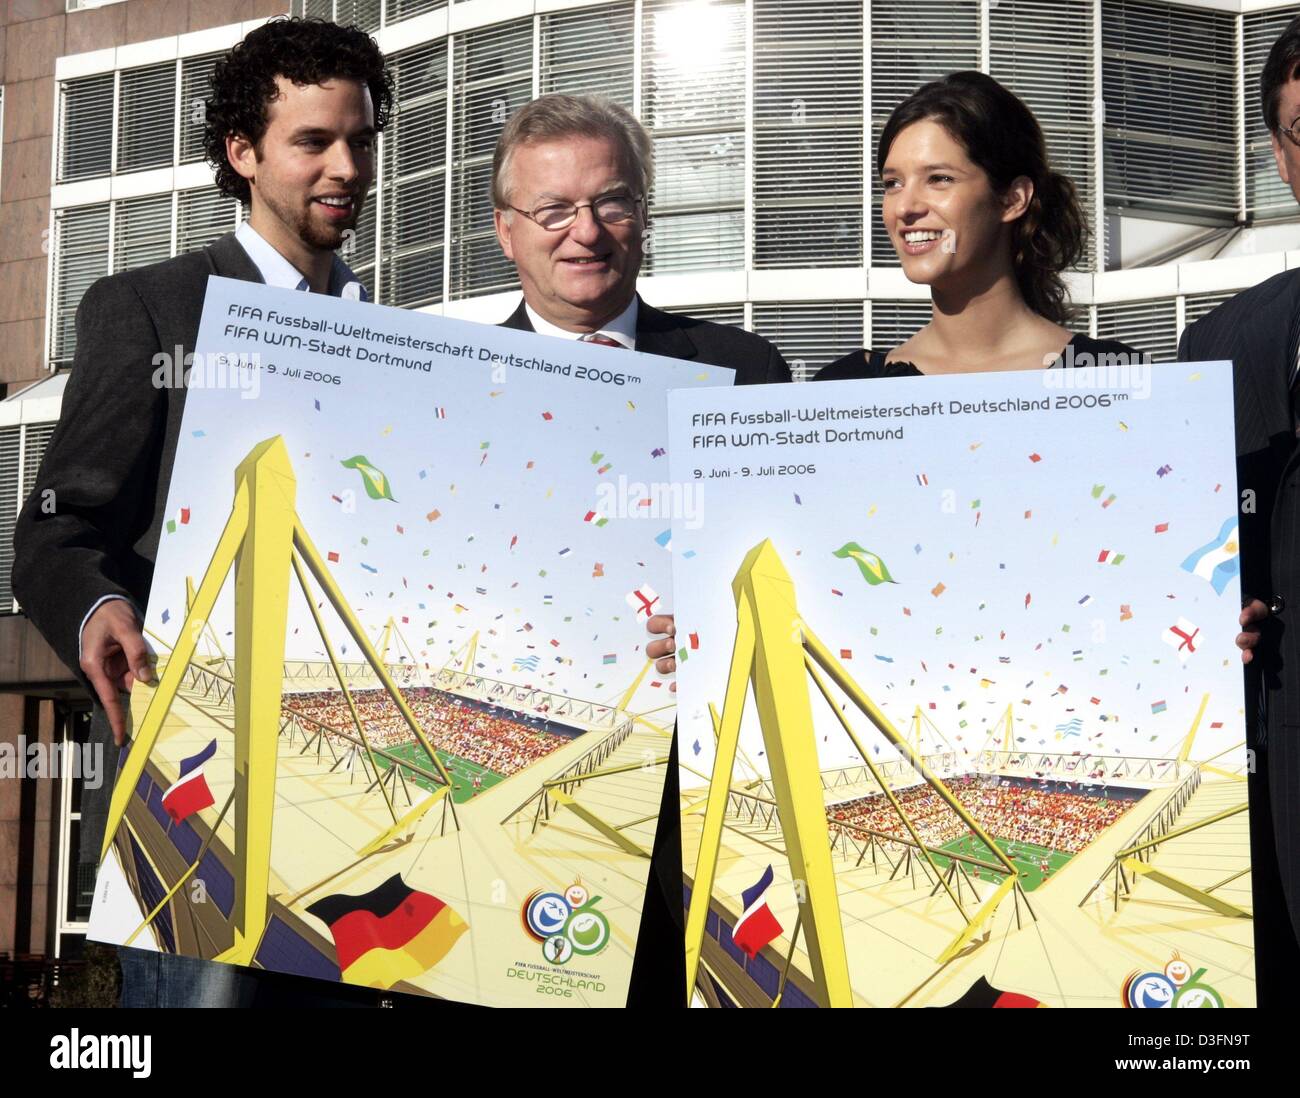 (dpa) - Along with Borussia Dormund official Gerd Niebaum present College students Oliver Koetting (l) and Kathrin Winkler (R) their design which has been chosen as the official FIFA Soccer World Cup 2006 poster for the city of Dortmund, Germany, 24 November 2004. The poster was chosen out of 70 poster entries and shows Dortmund's Westfalenstadion which will host six games during t Stock Photo